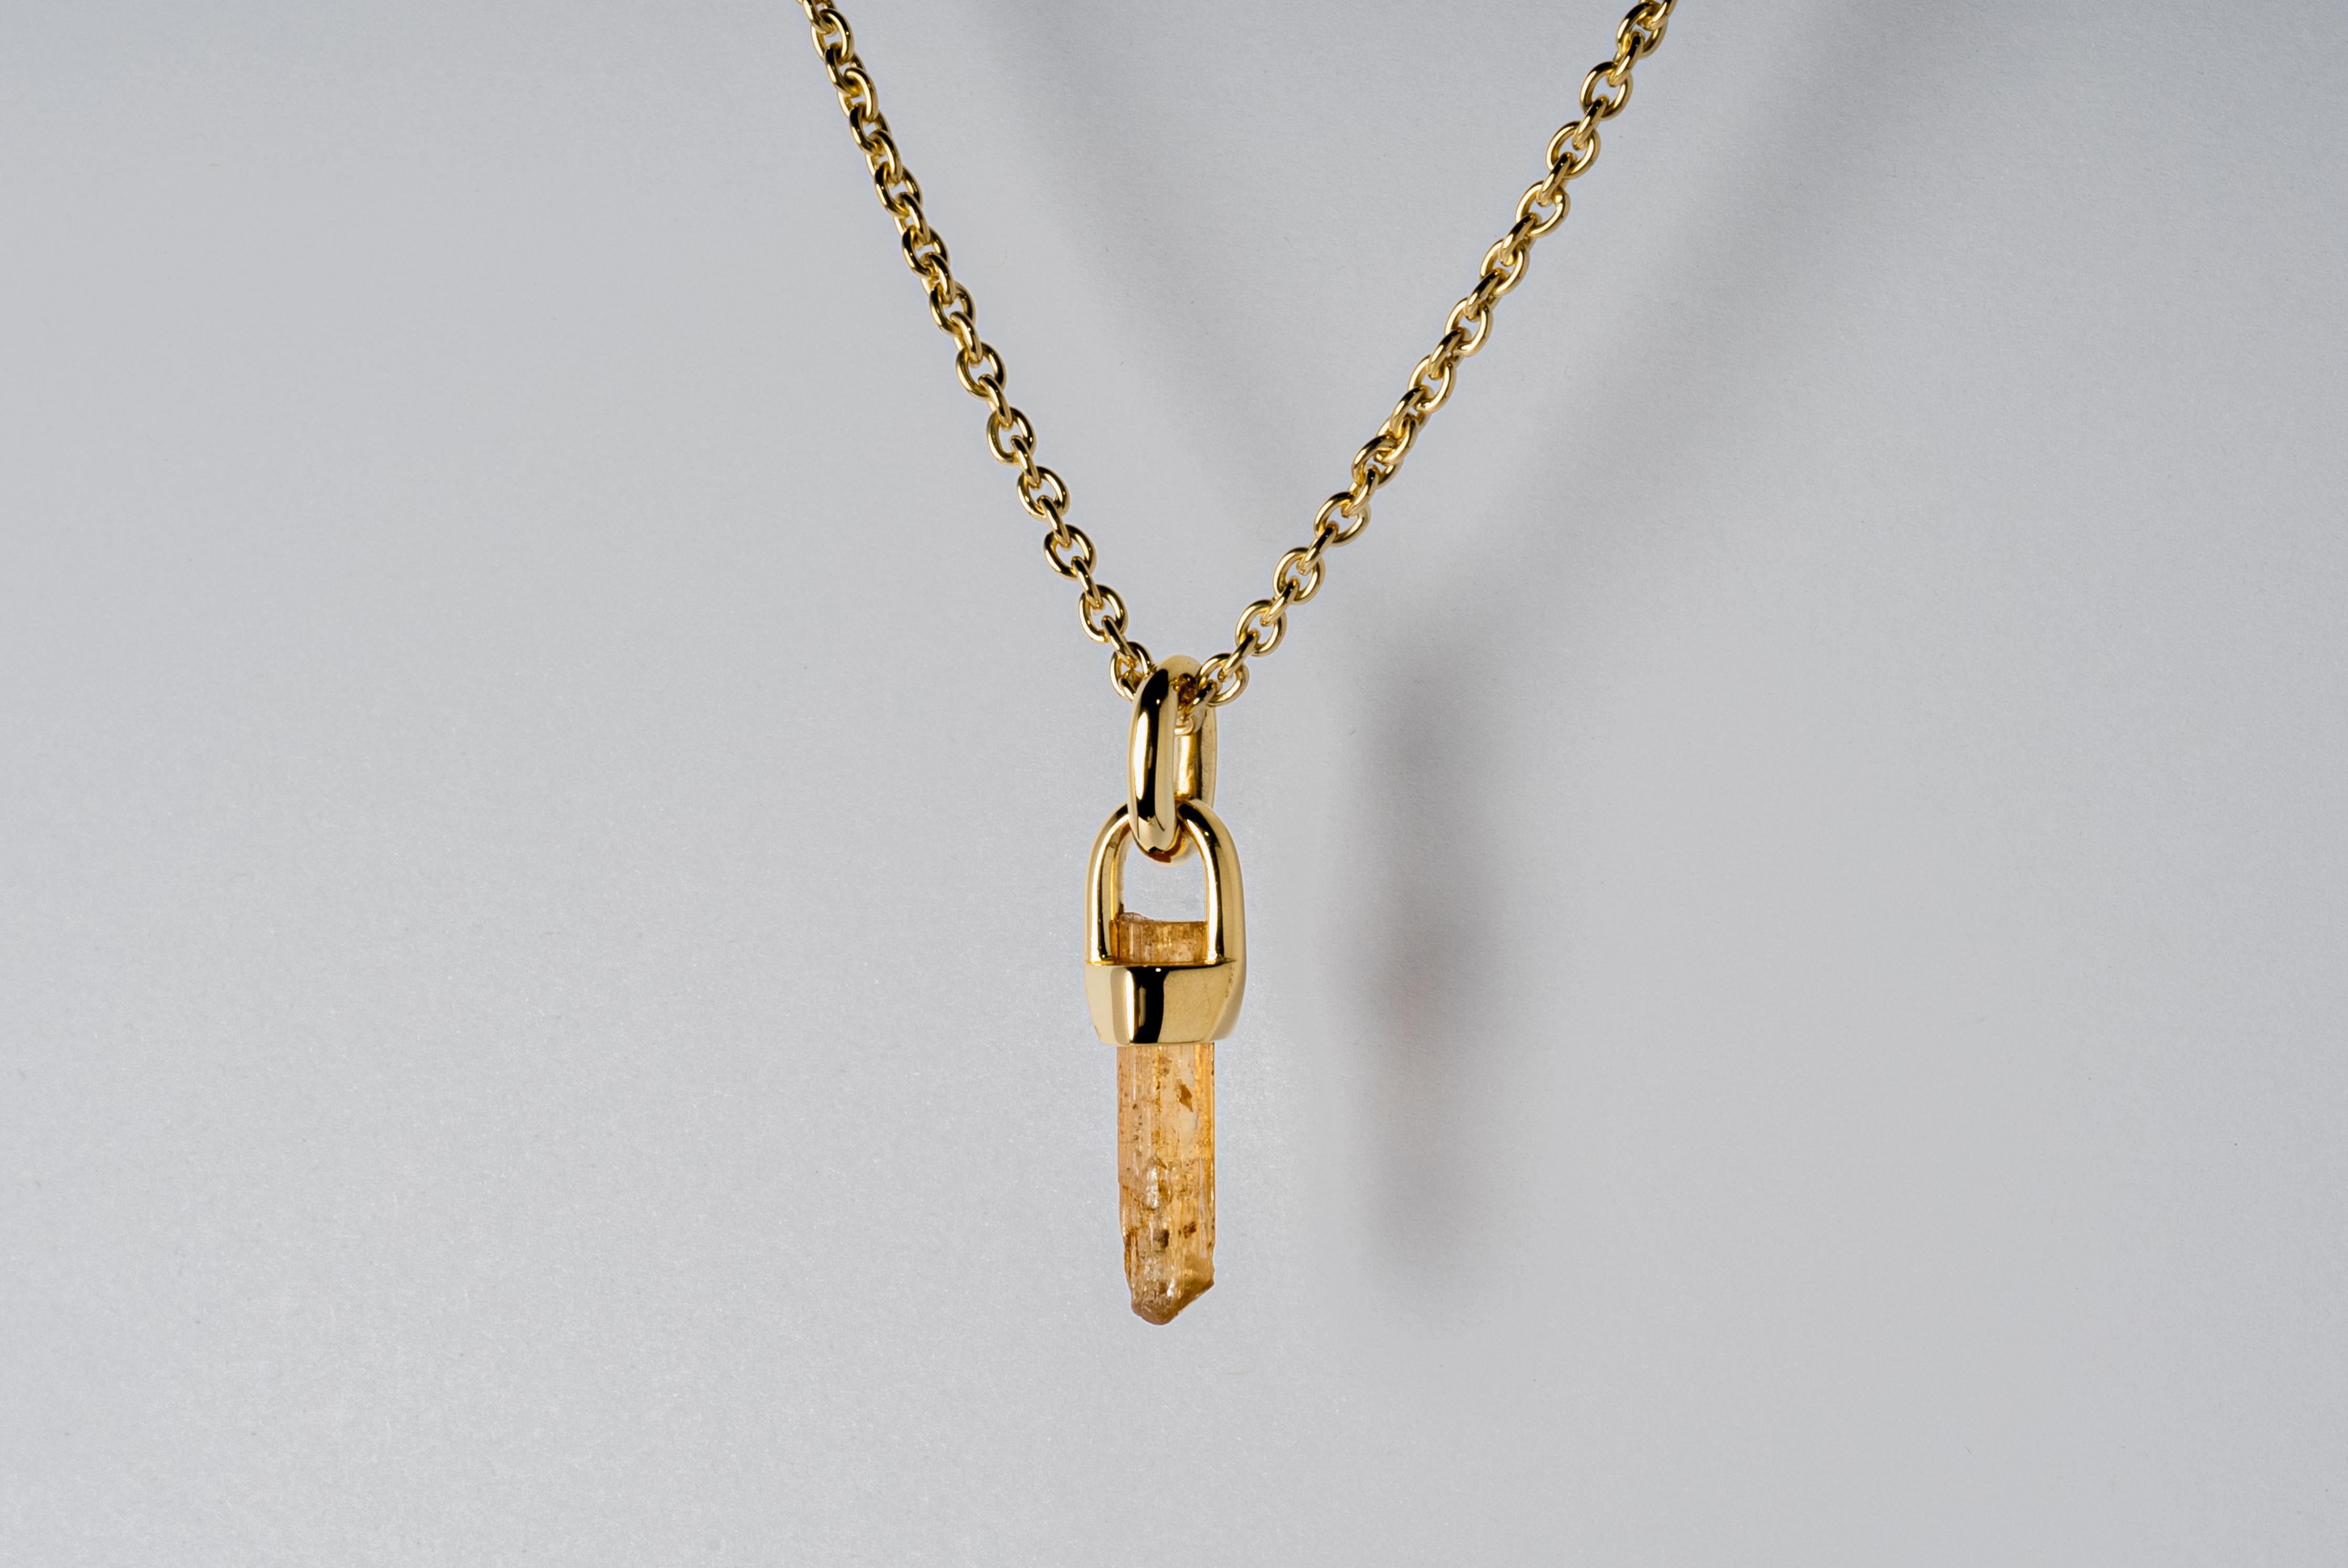 Rough Cut Talisman Necklace (Brace-Held, Imperial Topaz, YG+YGA+ITOP) For Sale